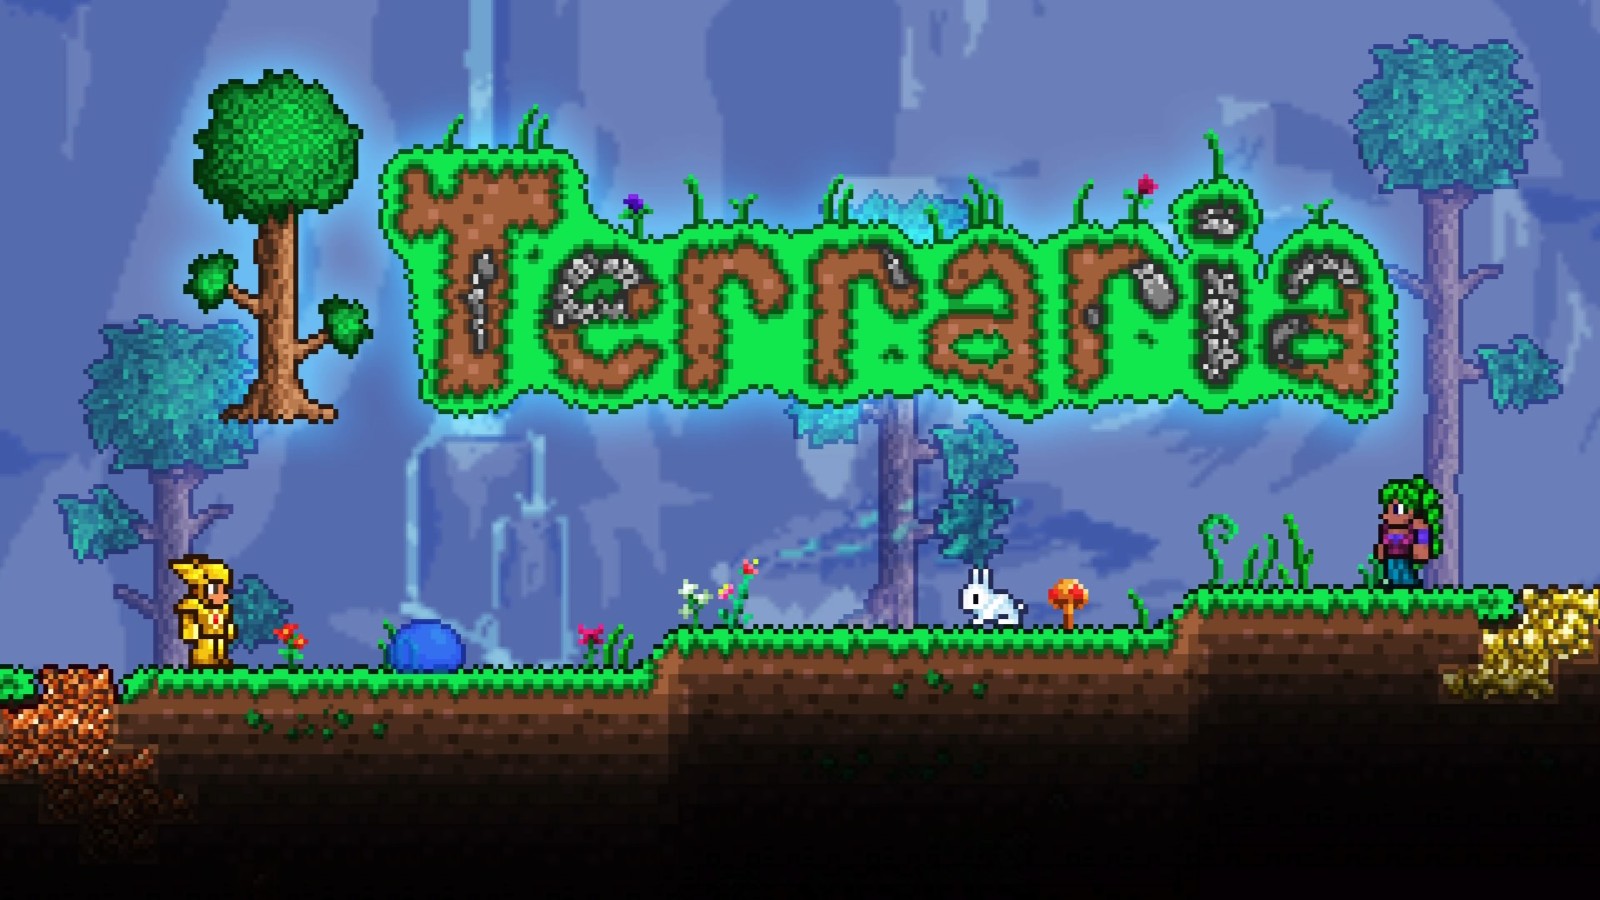  The cross platform online function of Terraria is under development. The developer wants to play a new game